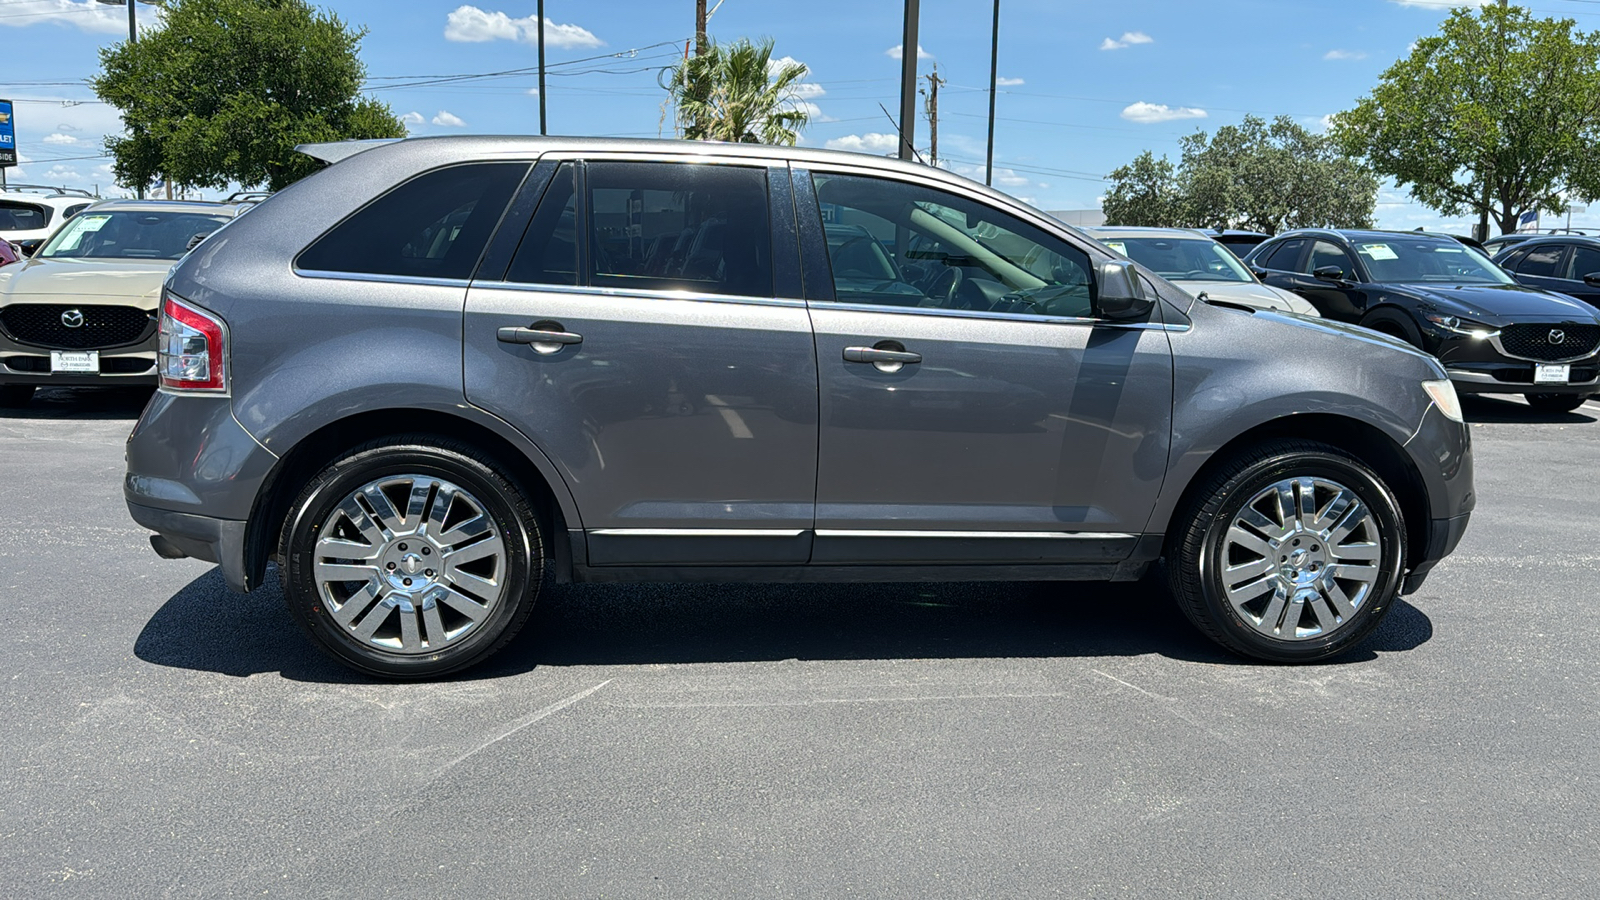 2010 Ford Edge Limited 9